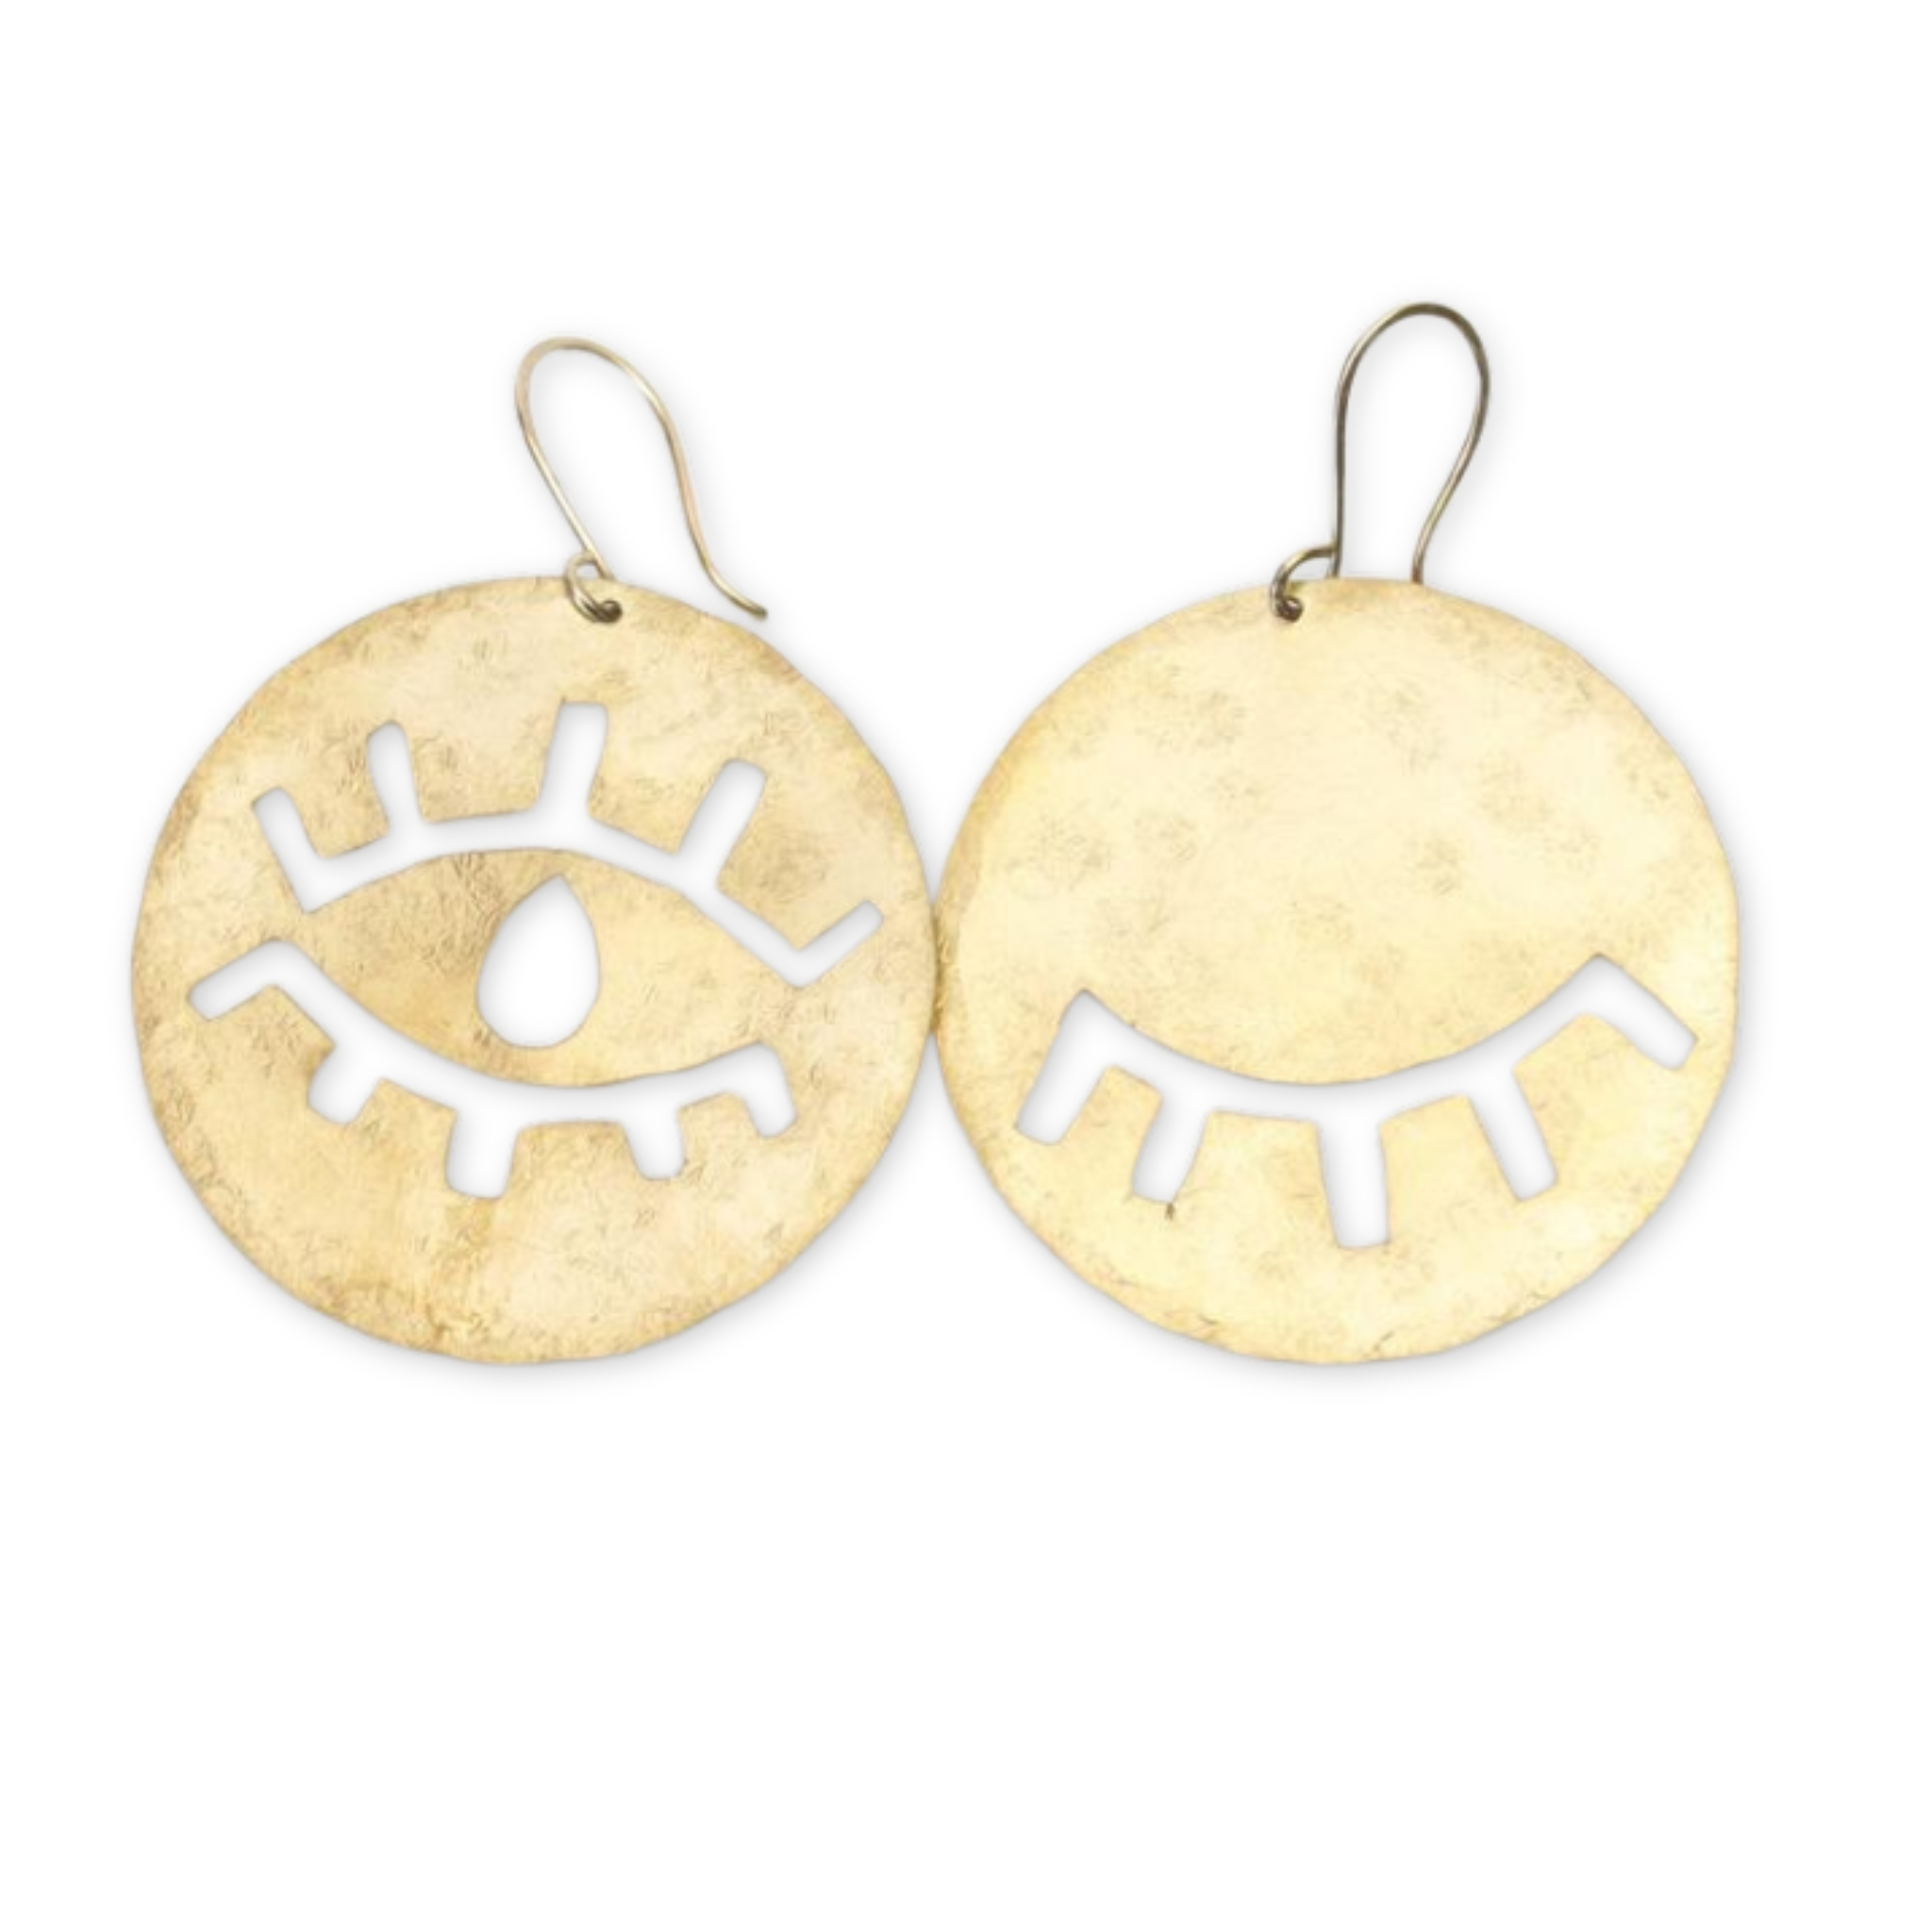 a pair of gold earrings with an open and closed eye design